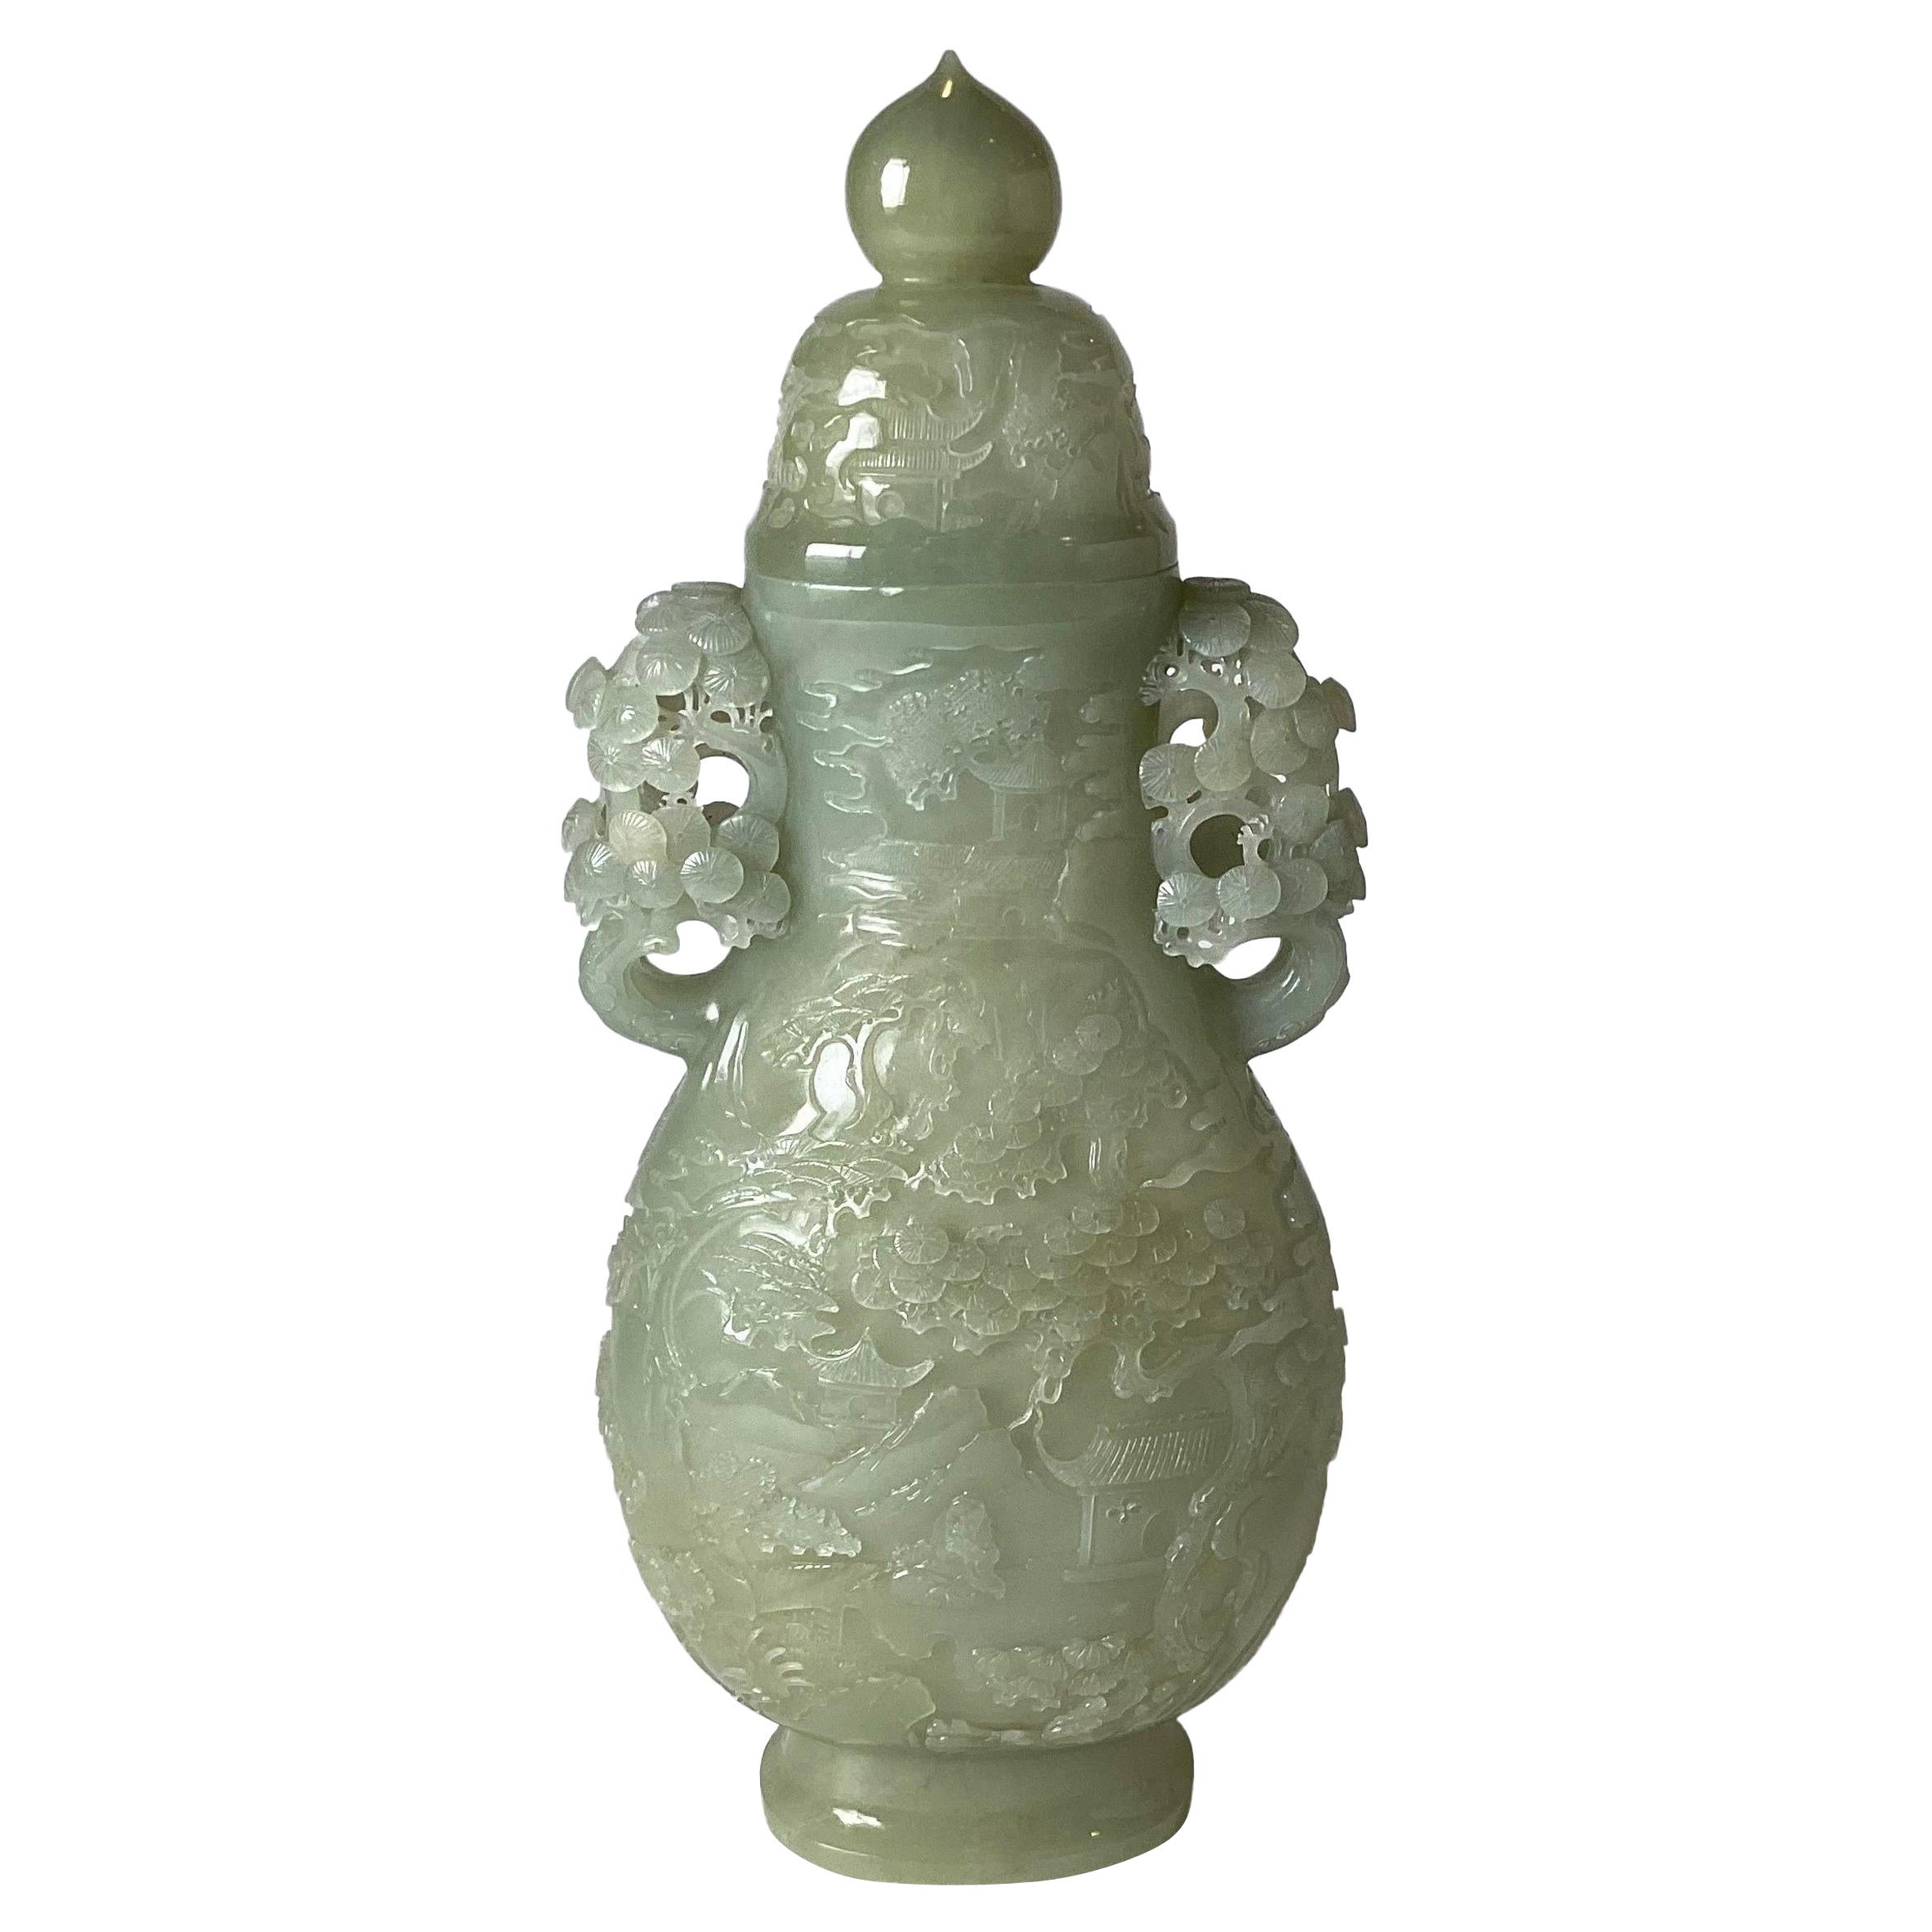 A Very Large Carved Caledon Jade Covered Urn